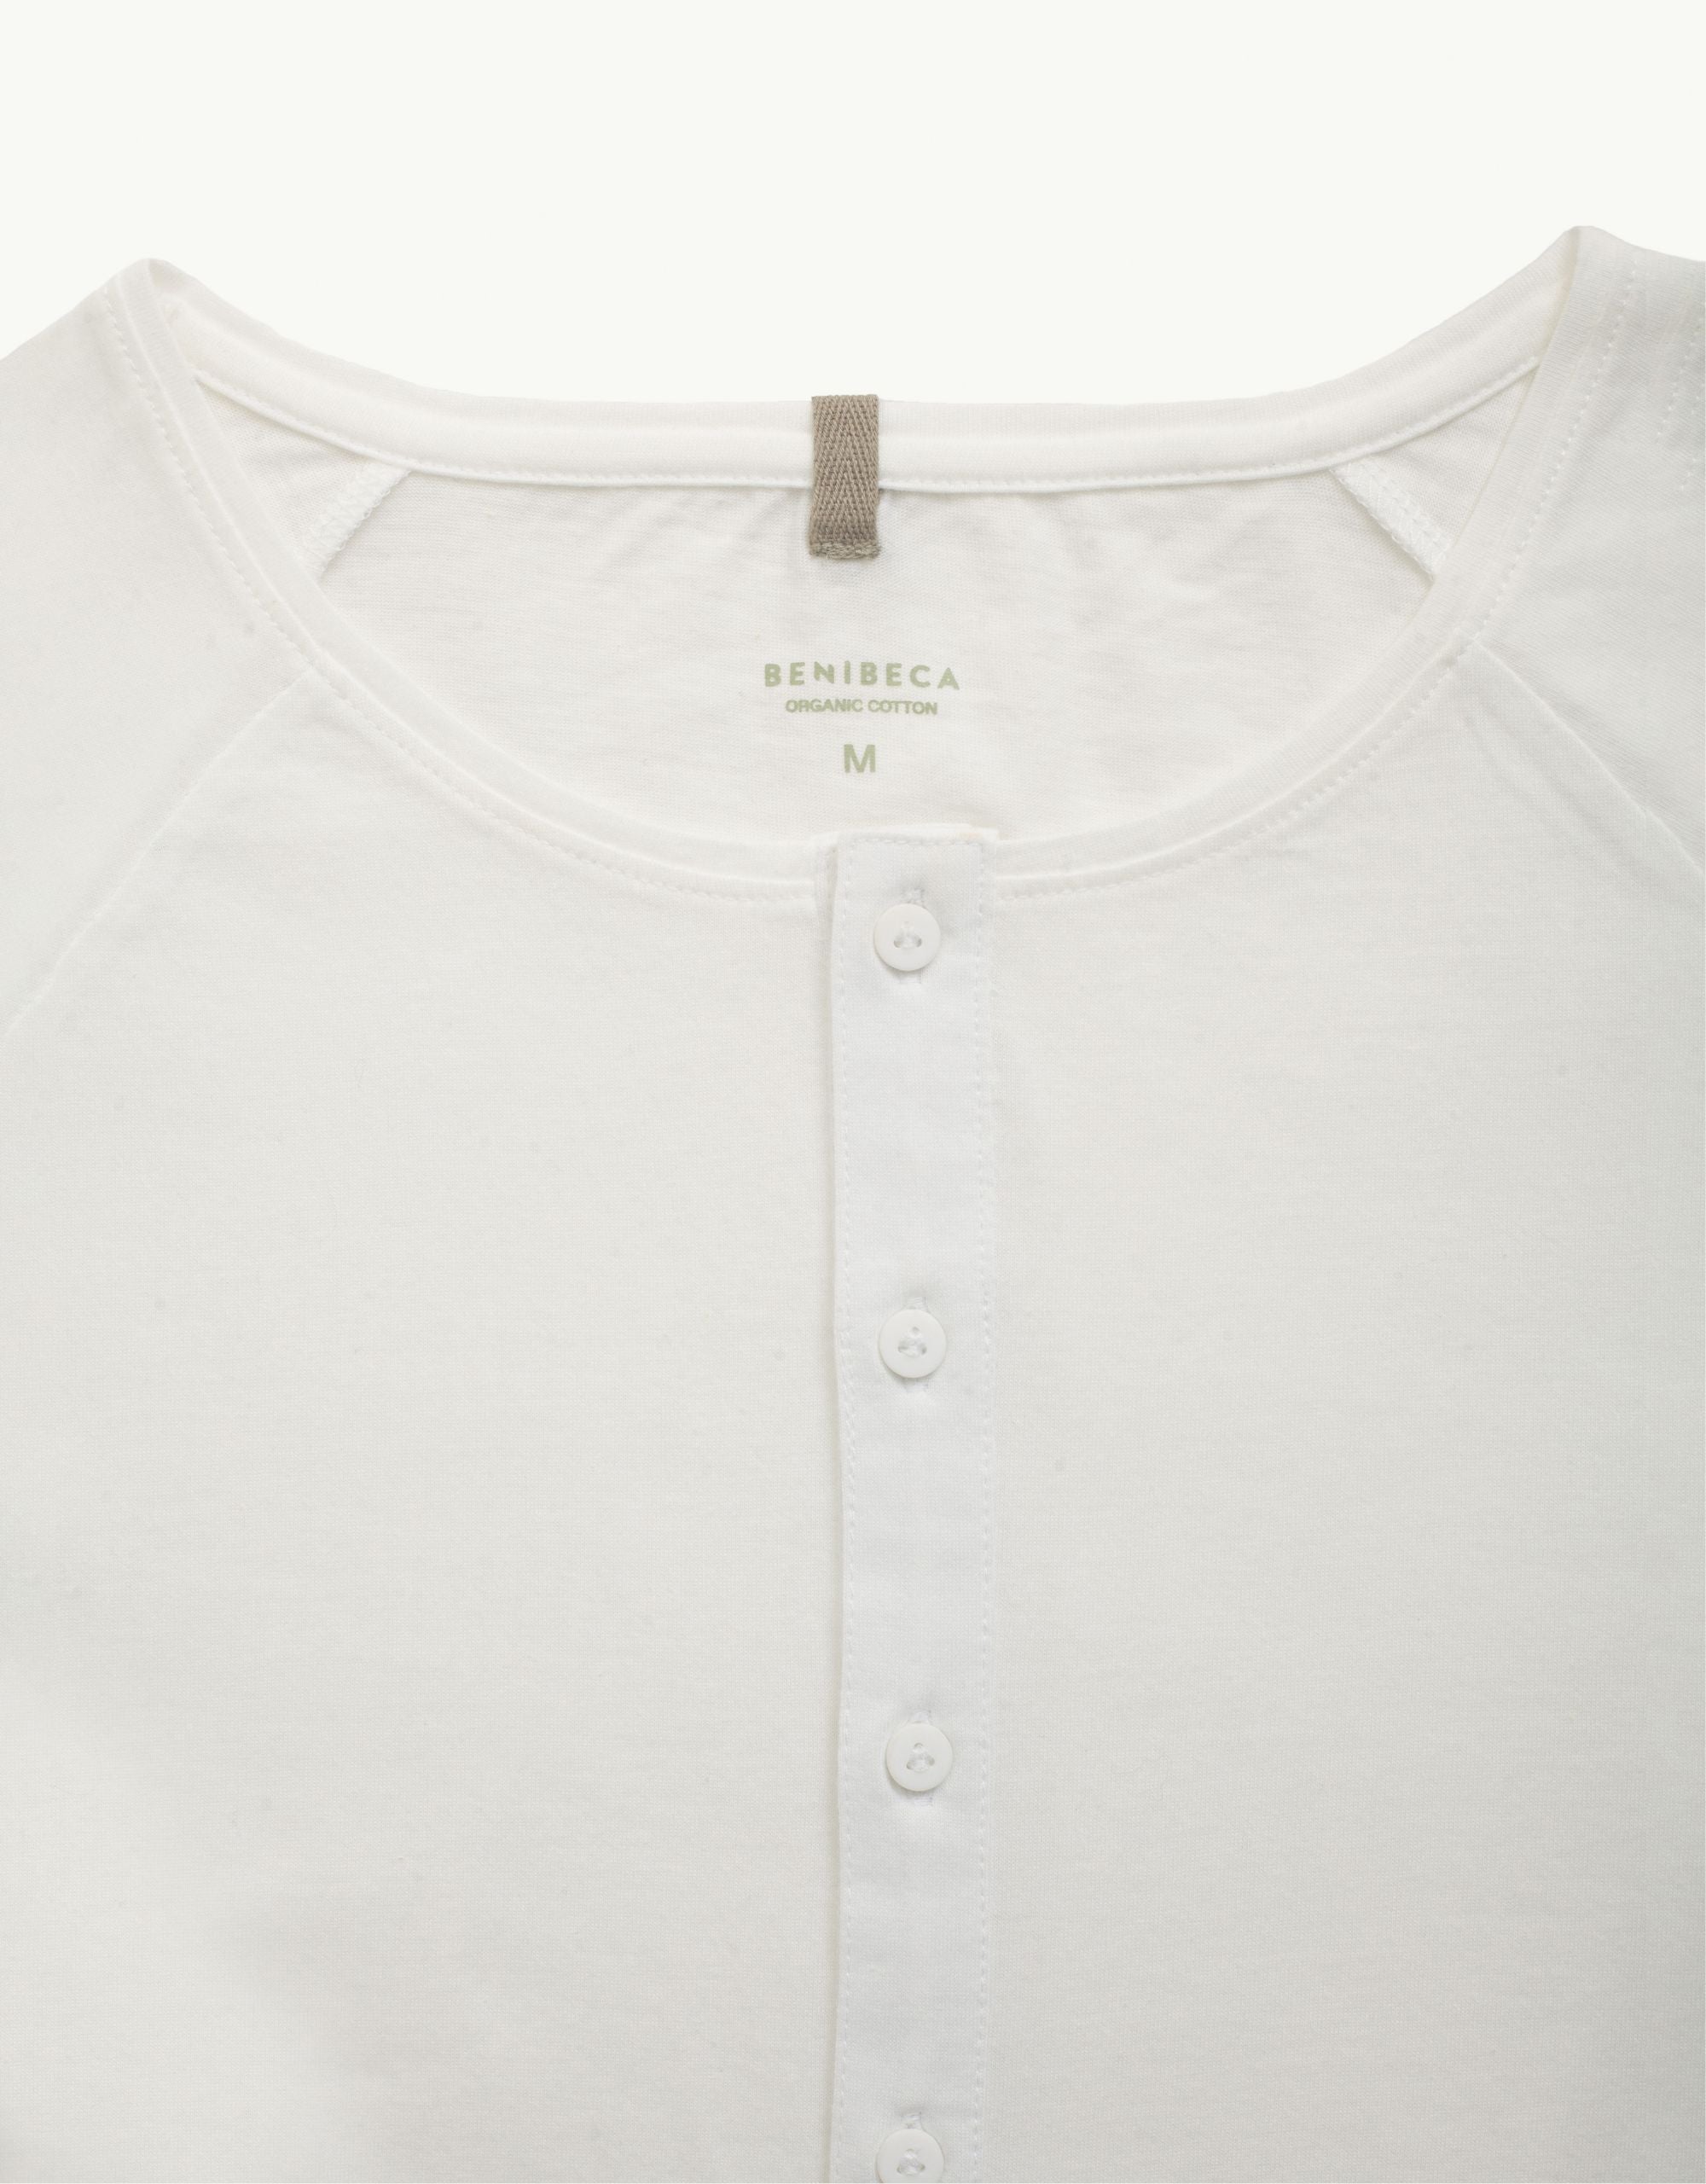 Discover sustainable fashion for men with our polo t-shirt Blanc T-shati in white color. Crafted for everyday luxury, our tees provide unmatched softness and all-day comfort. Stay cool in our breathable organic cotton tees for men, made from 100% organic cotton to champion sustainability and skin-friendly choices.